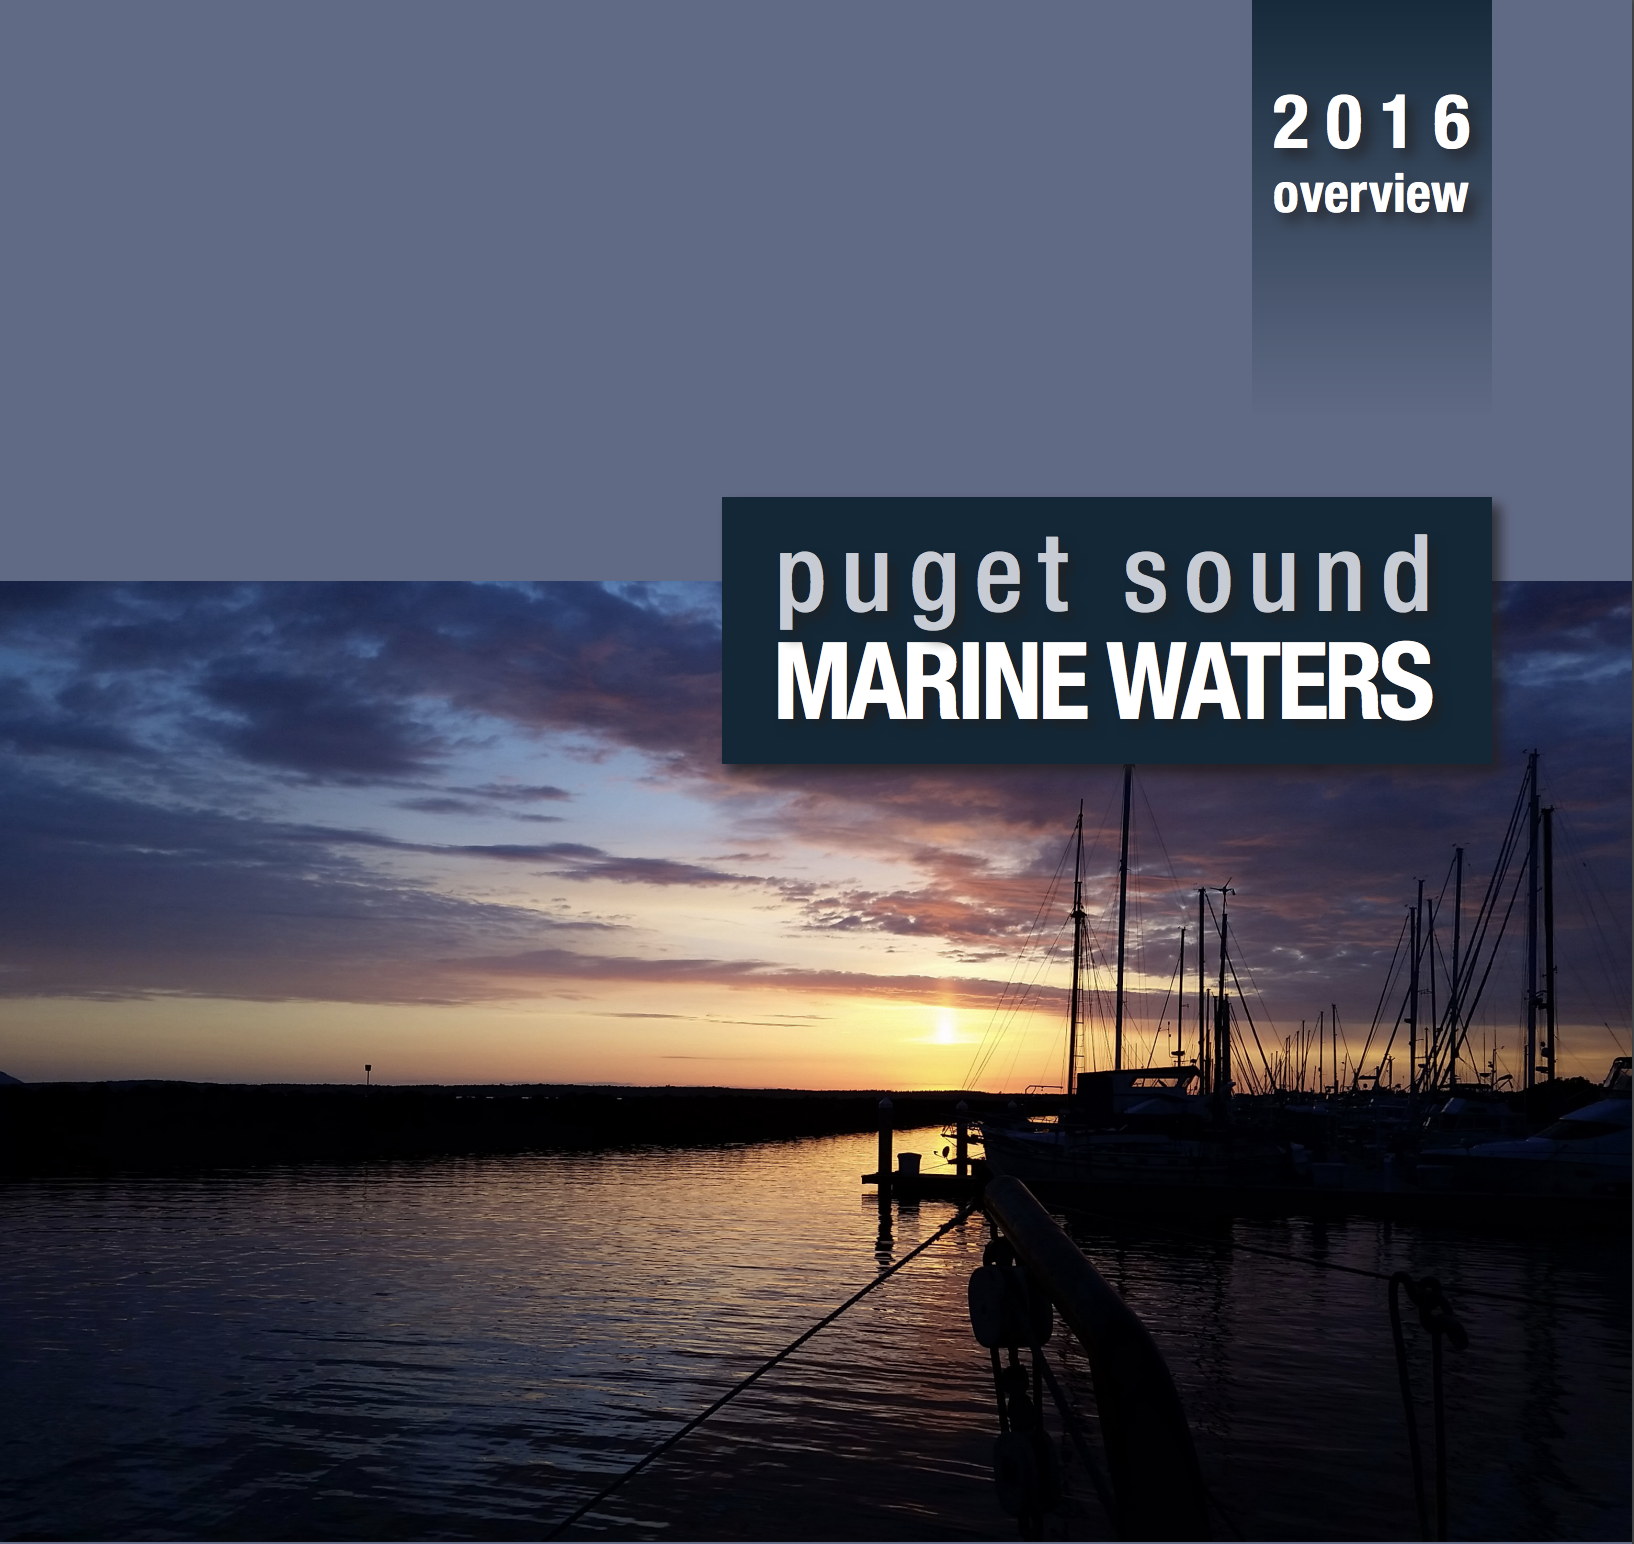 2016 Puget Sound Marine Waters Overview.